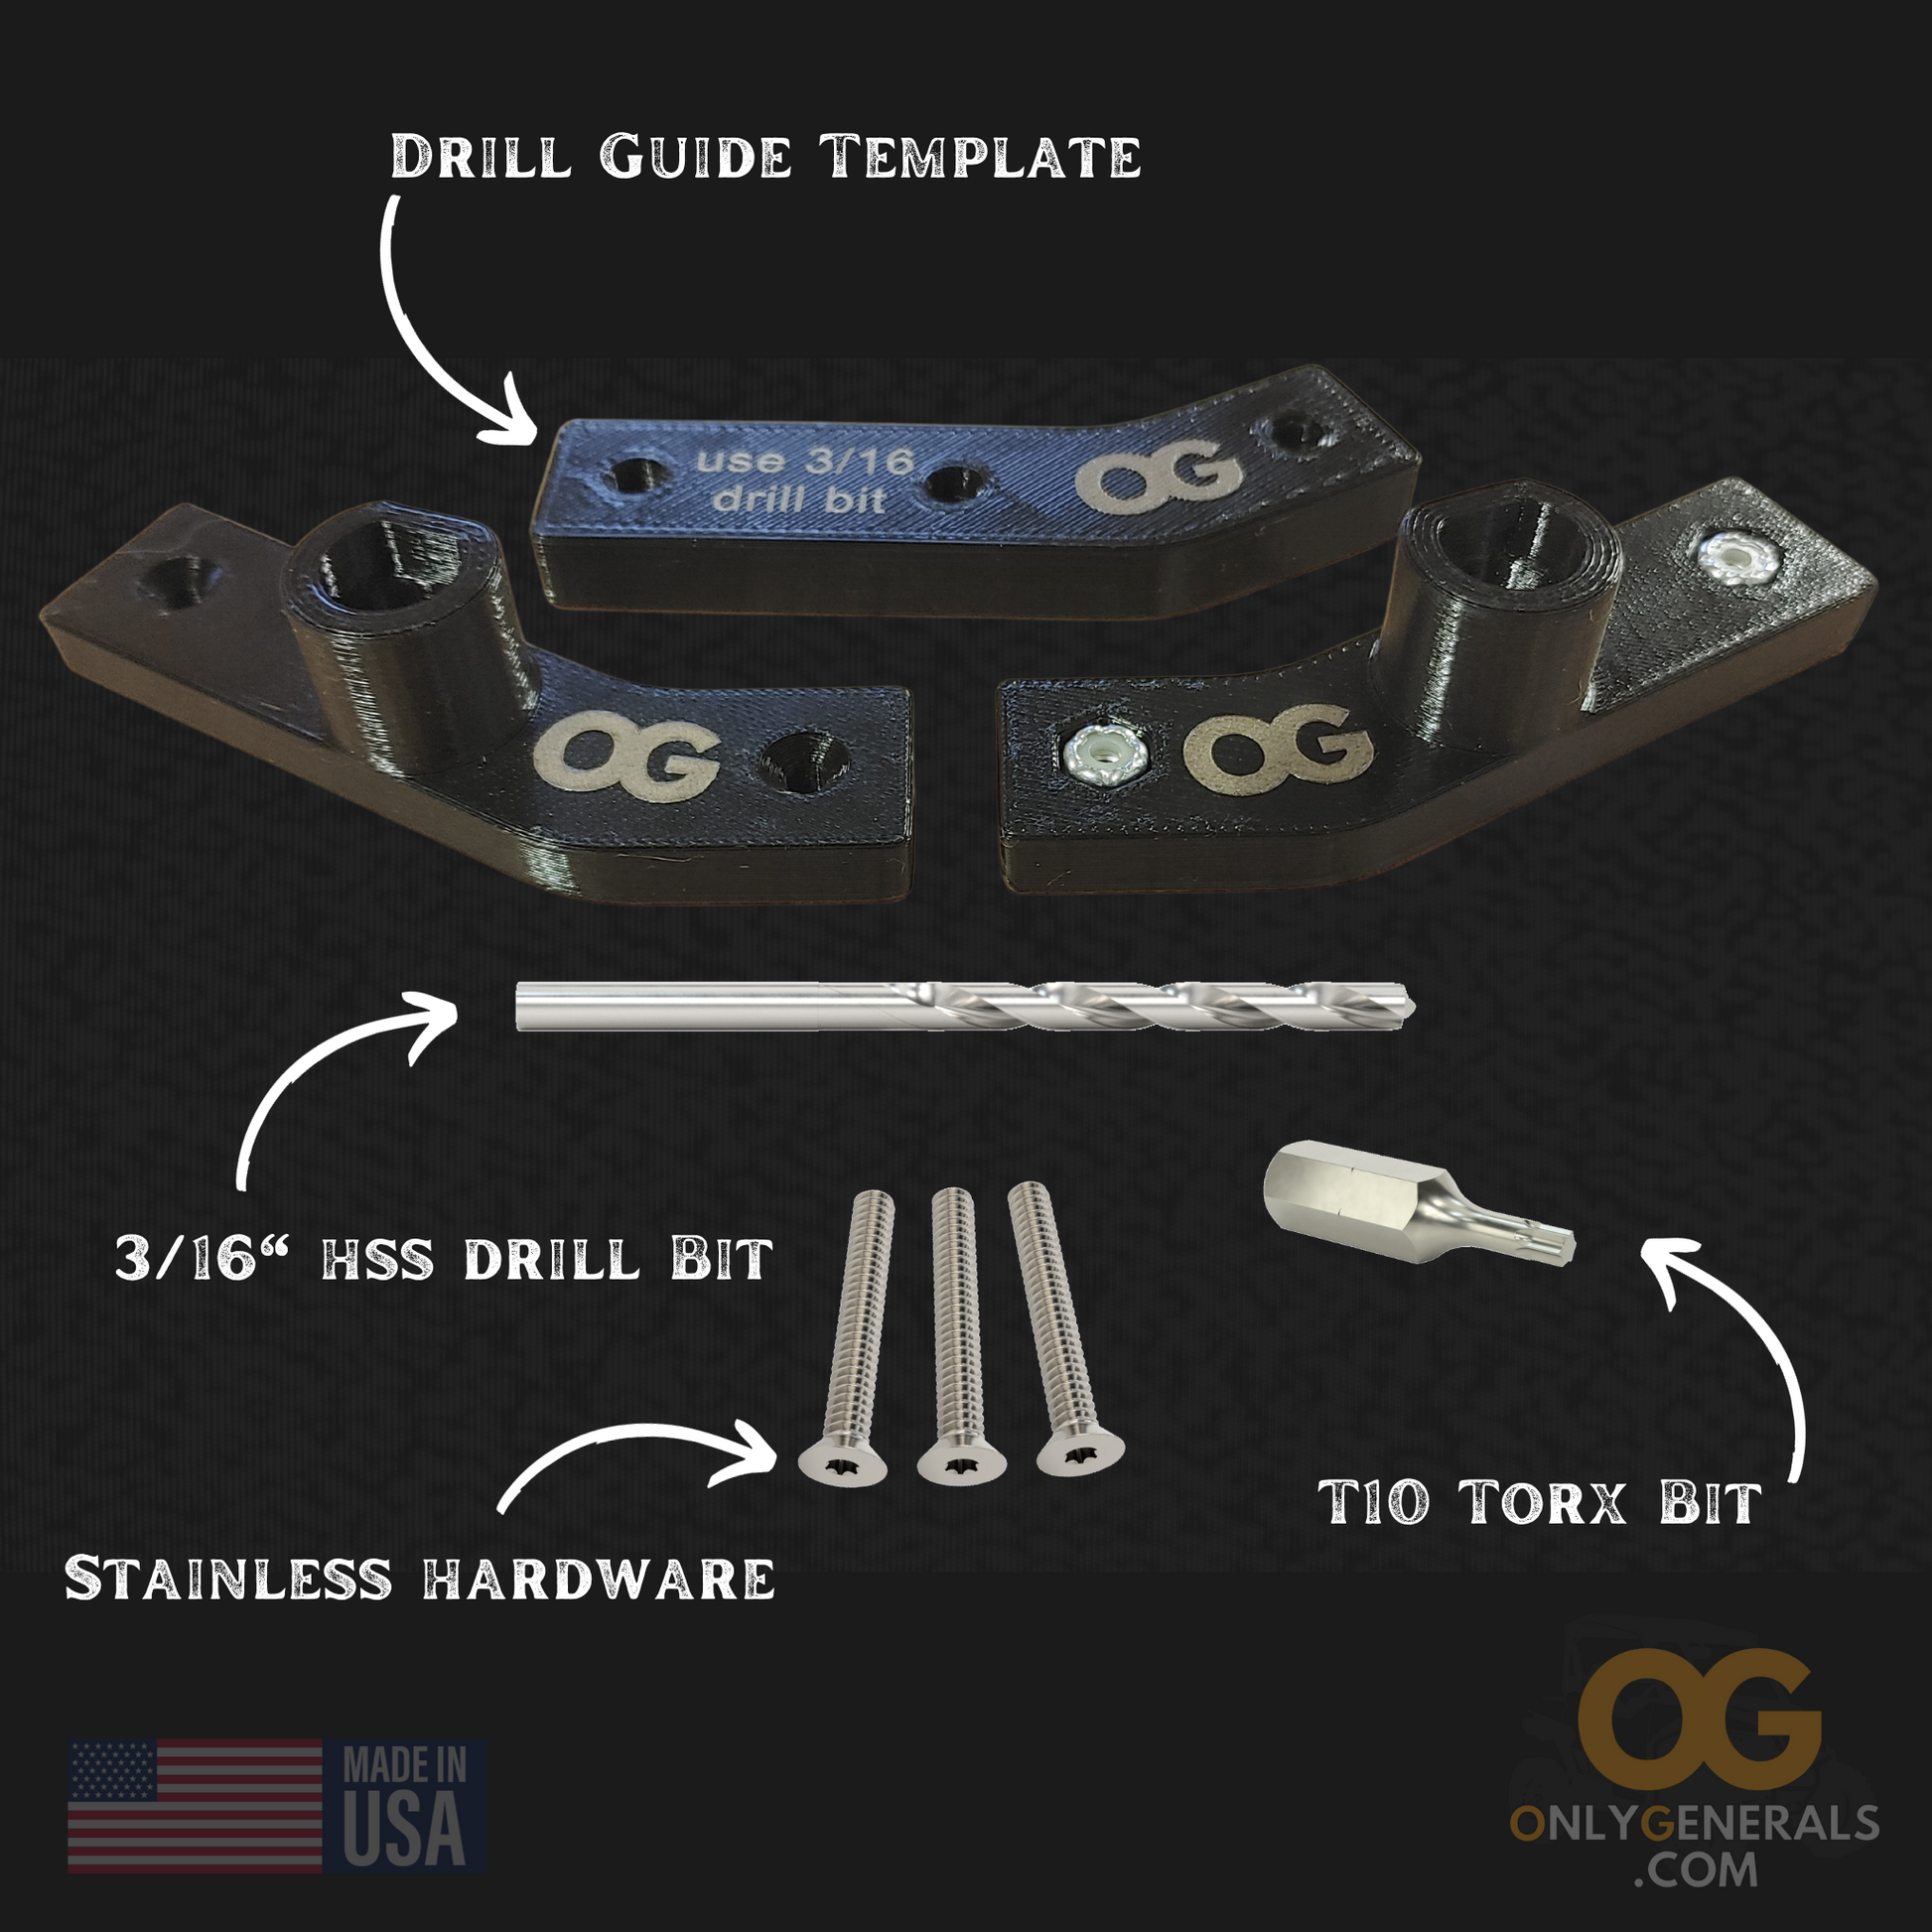 Text overlay on image of OG tip out inserts dictating what all the components are for the Polaris General tip-out 3rd row insert kit by OnlyGenerals.